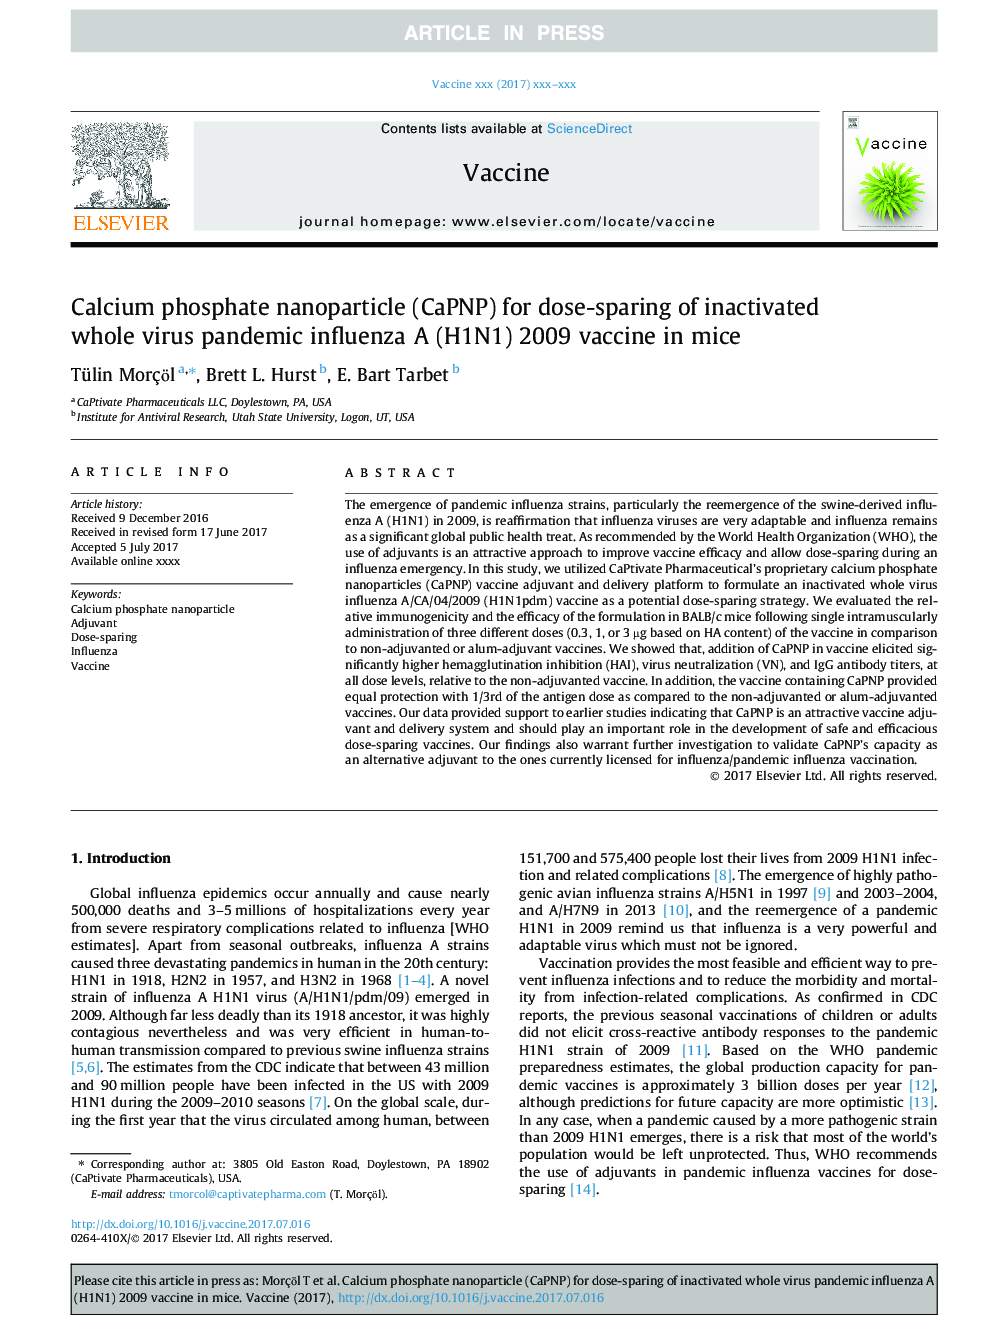 Calcium phosphate nanoparticle (CaPNP) for dose-sparing of inactivated whole virus pandemic influenza A (H1N1) 2009 vaccine in mice